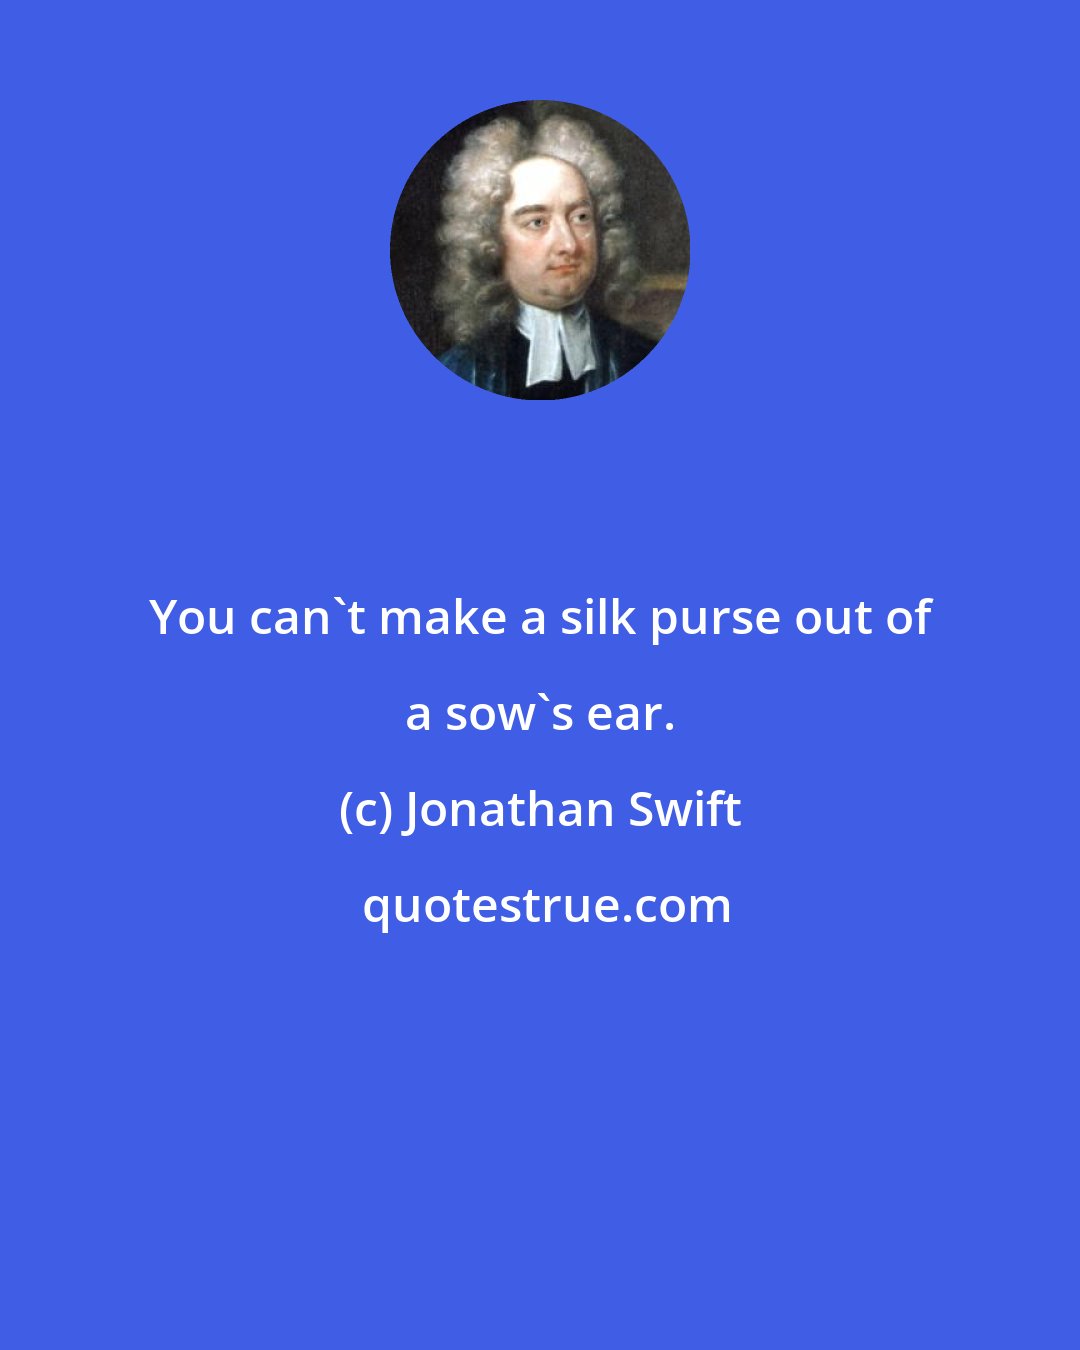 Jonathan Swift: You can't make a silk purse out of a sow's ear.